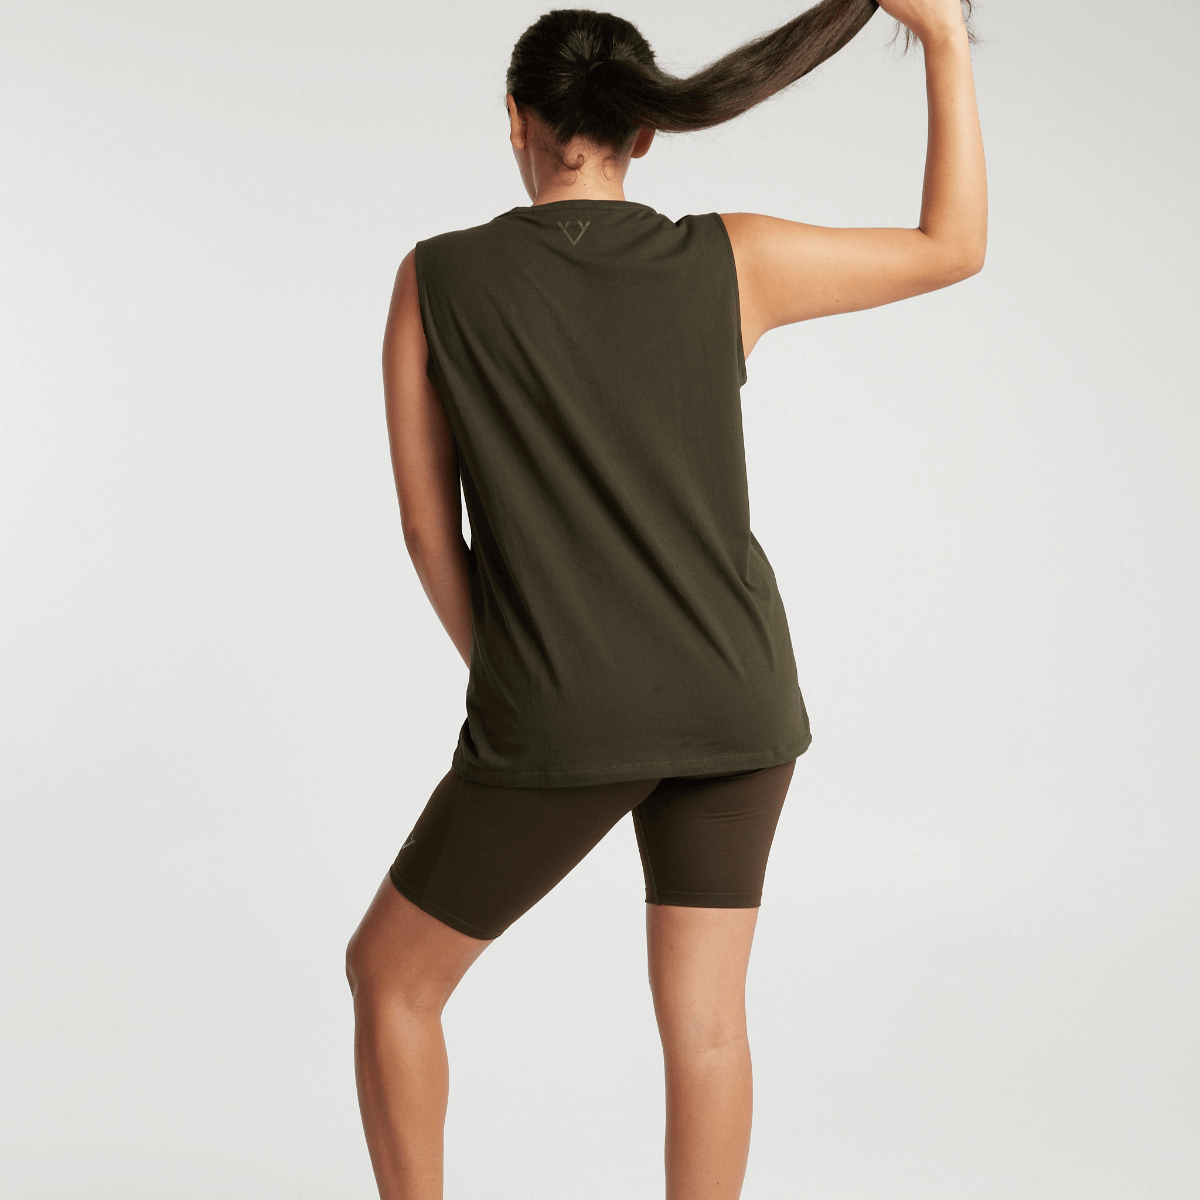 Victoria Stag's Core Muscle Tank in Khaki back